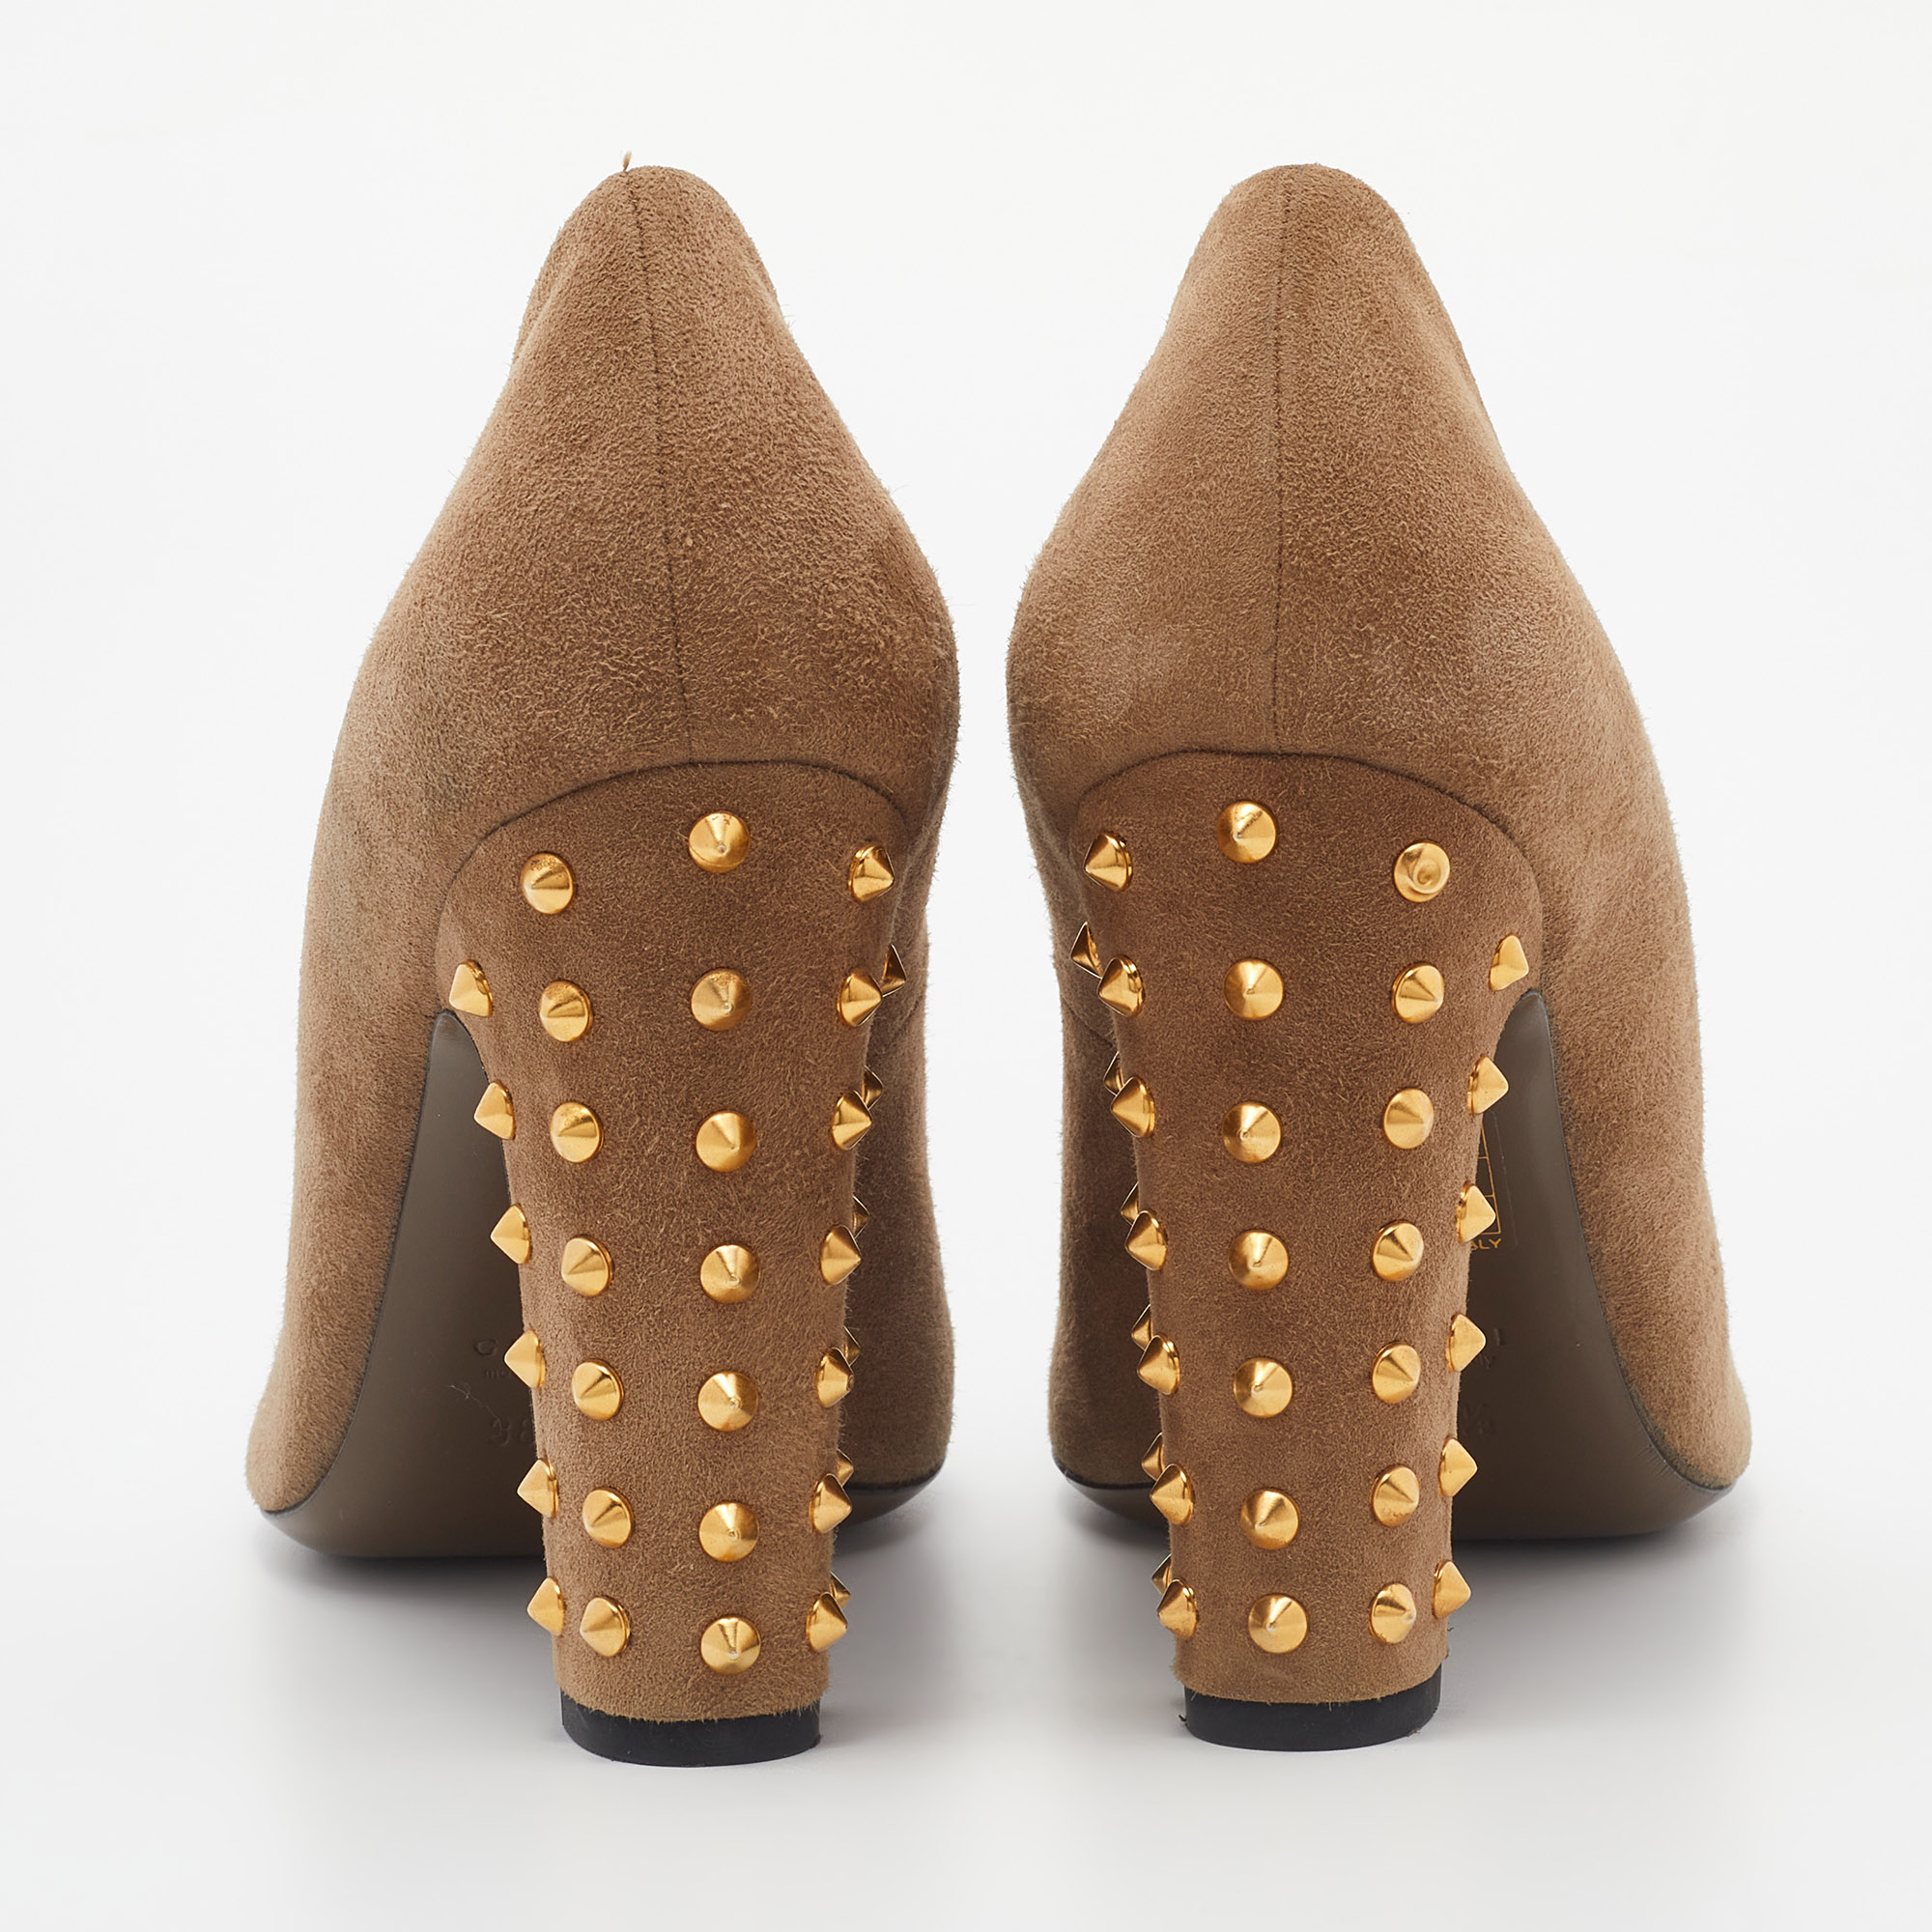 Gucci Brown Suede Studded Block Heel Pumps Size 38.5